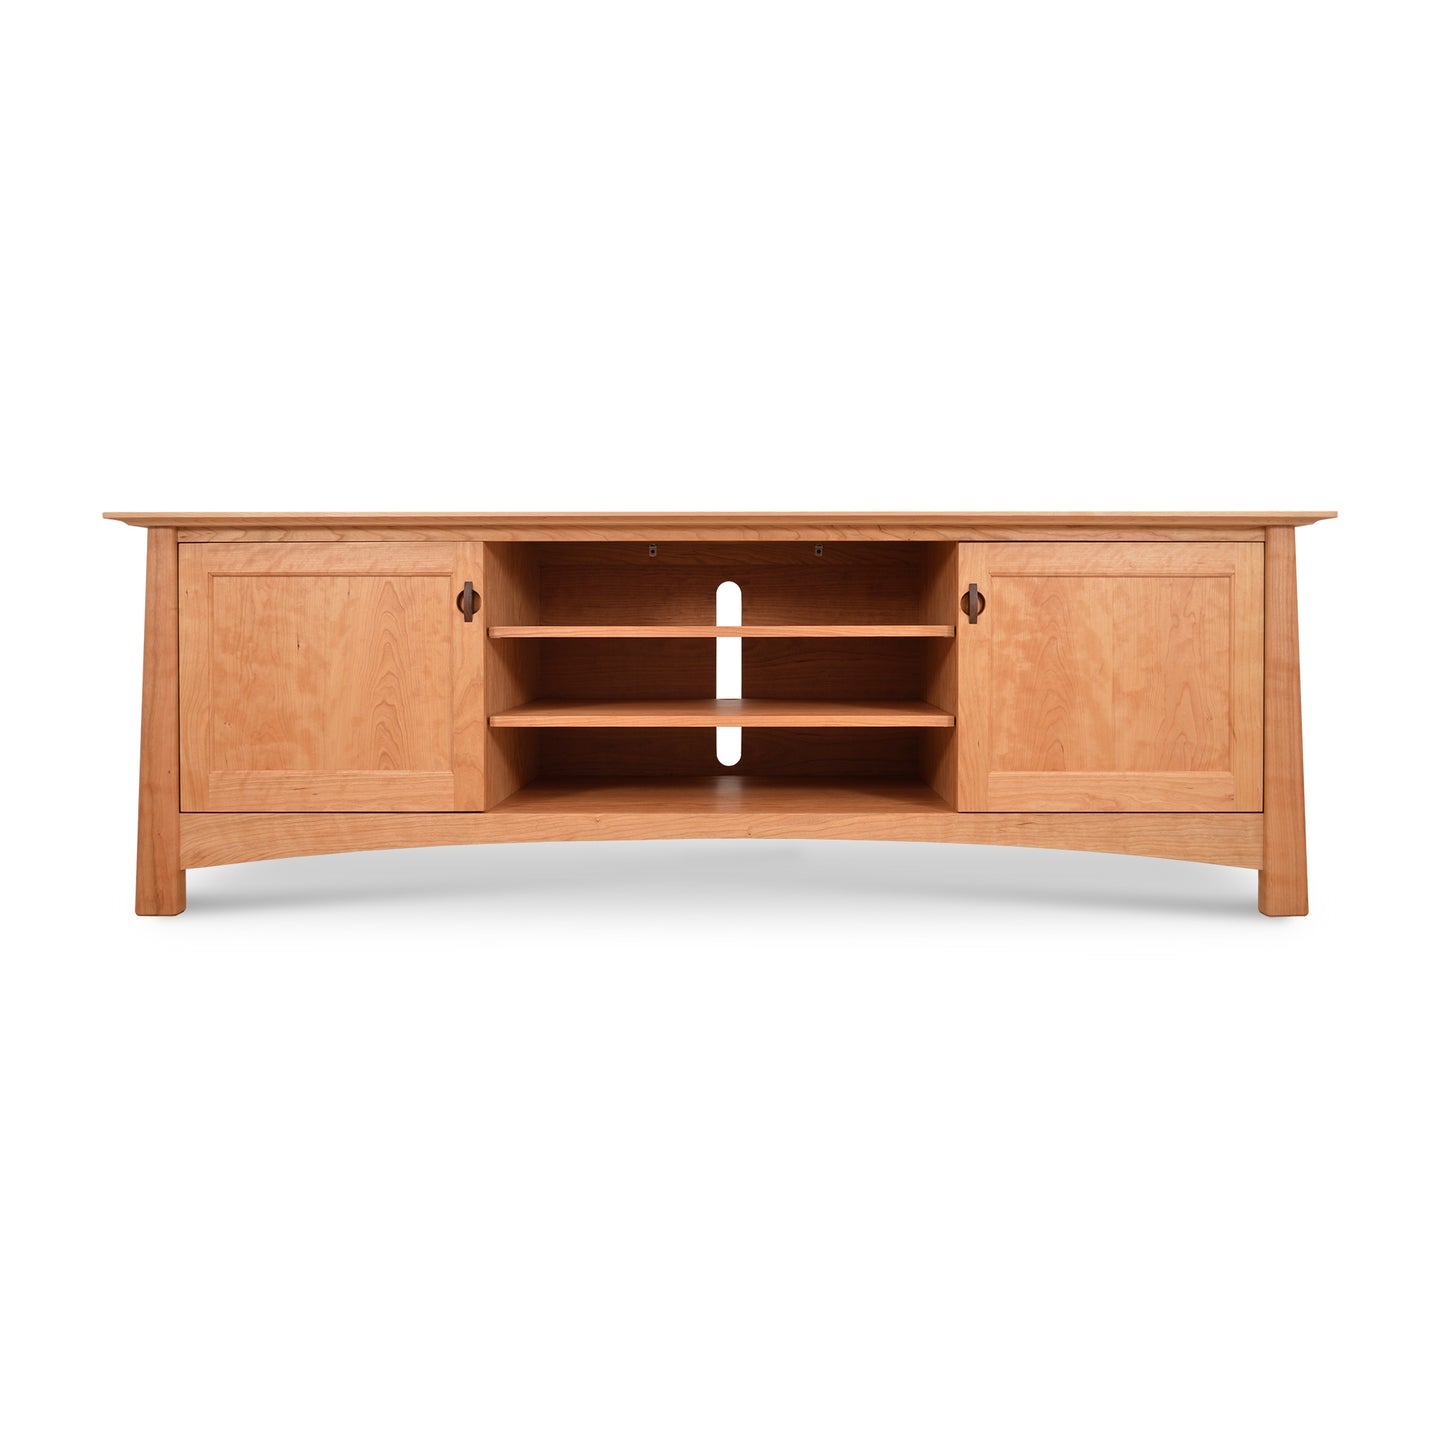 A long, curved Maple Corner Woodworks Cherry Moon 80" TV-Media Console with open central shelves and closed cabinets on each side, set against a white background.